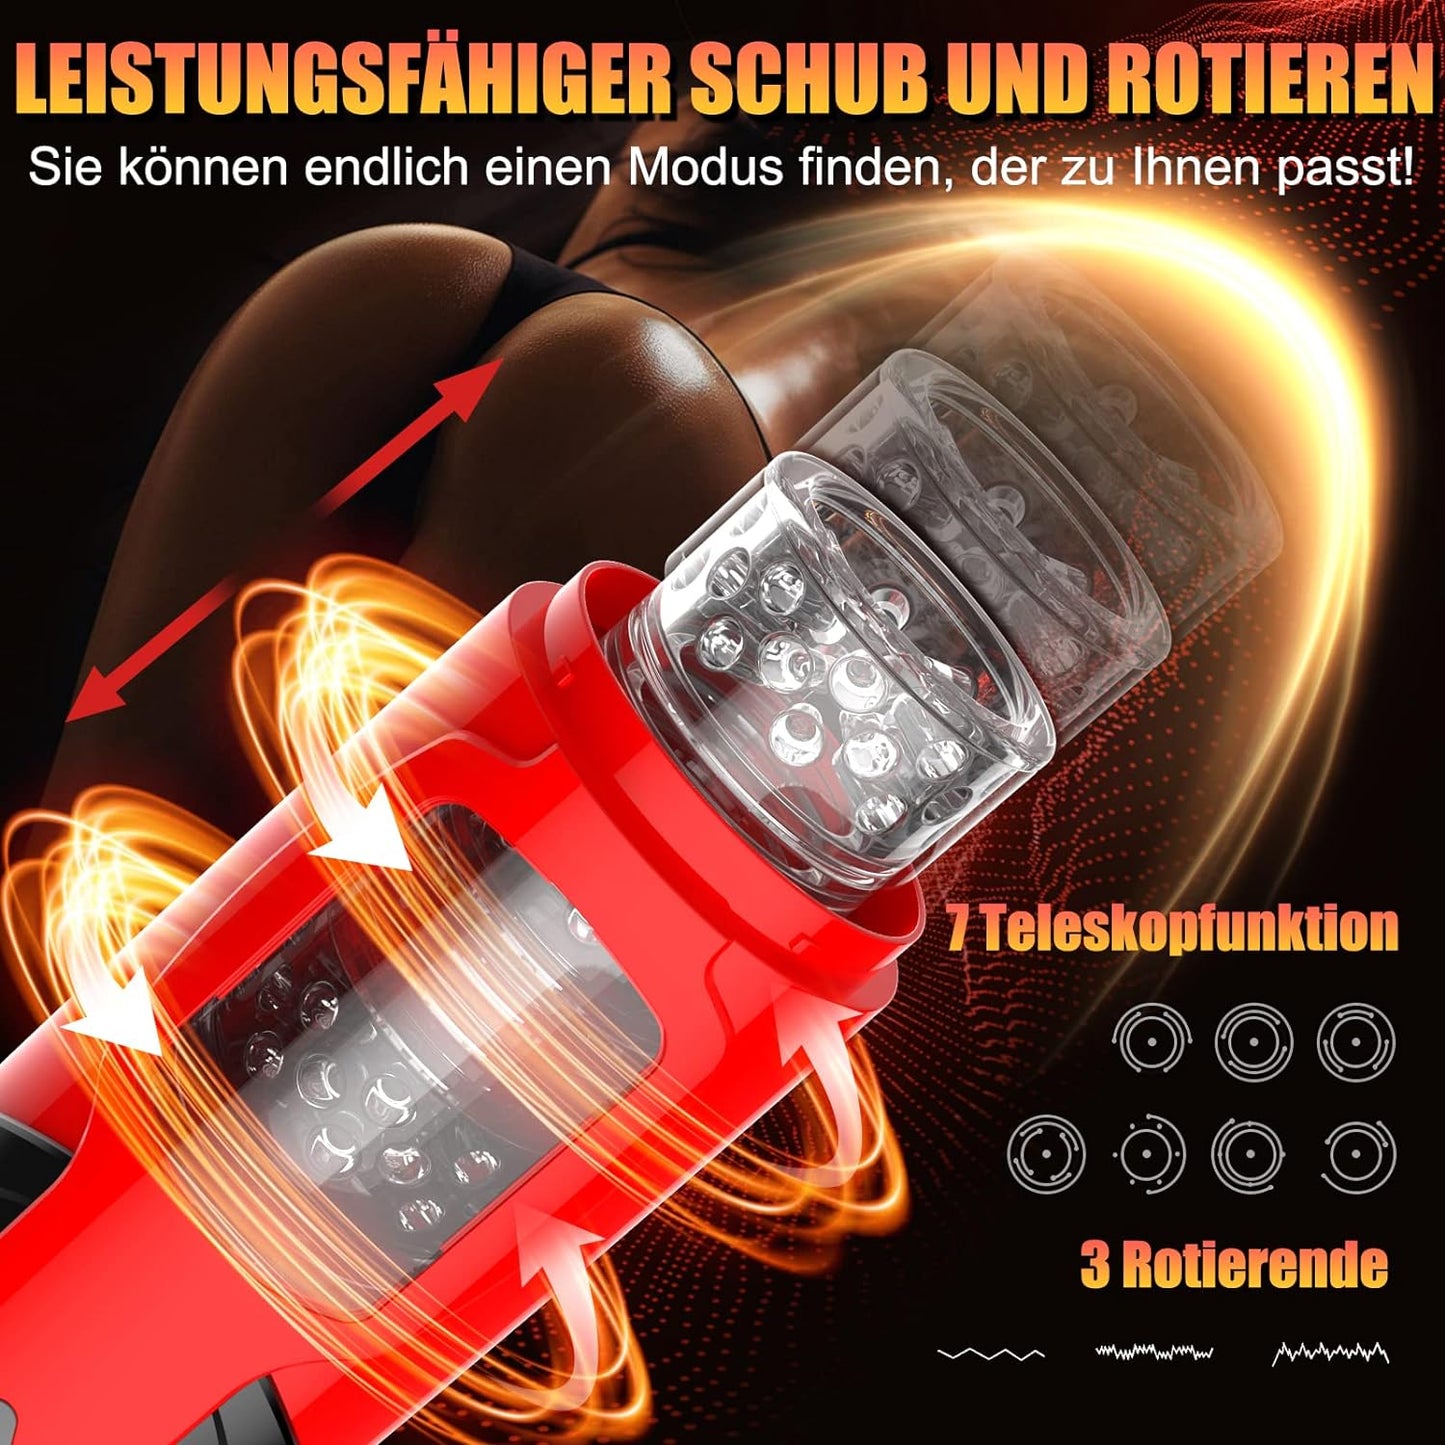 Electric masturbator hands-free cup with 7 modes telescopic function and rotating massage function 